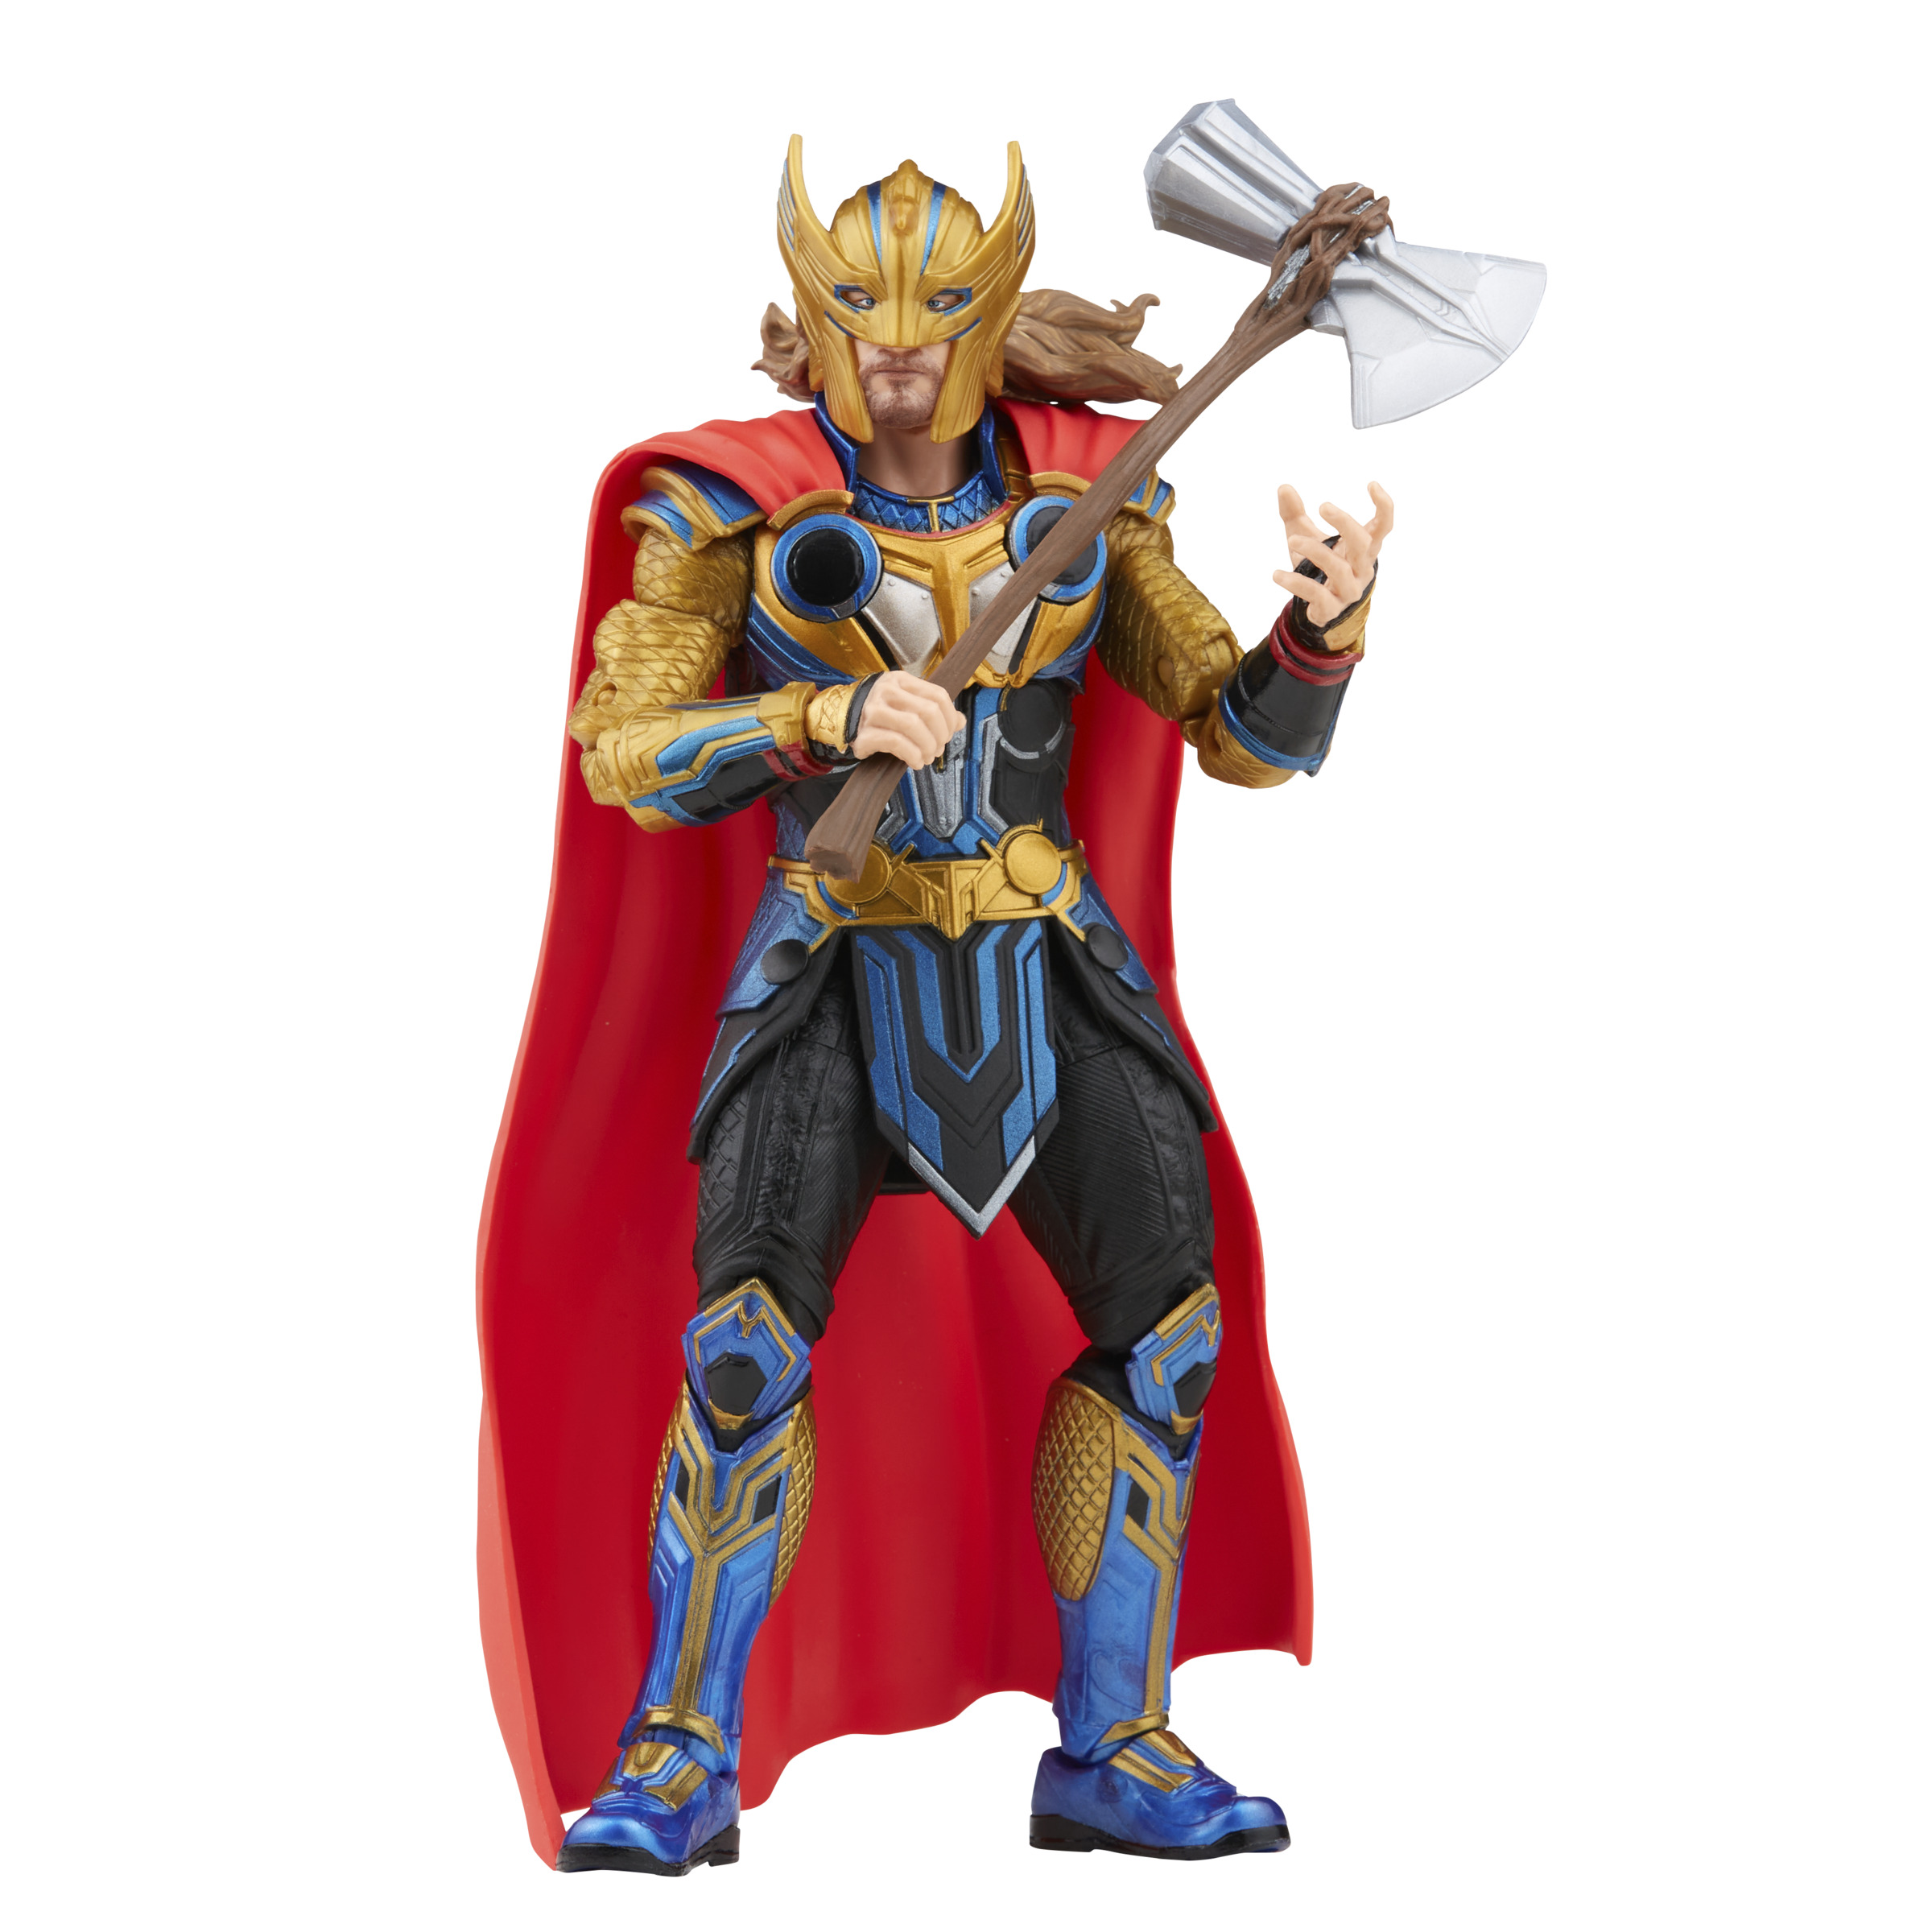 THOR: LOVE AND THUNDER toys reveal first look at Christian Bale's